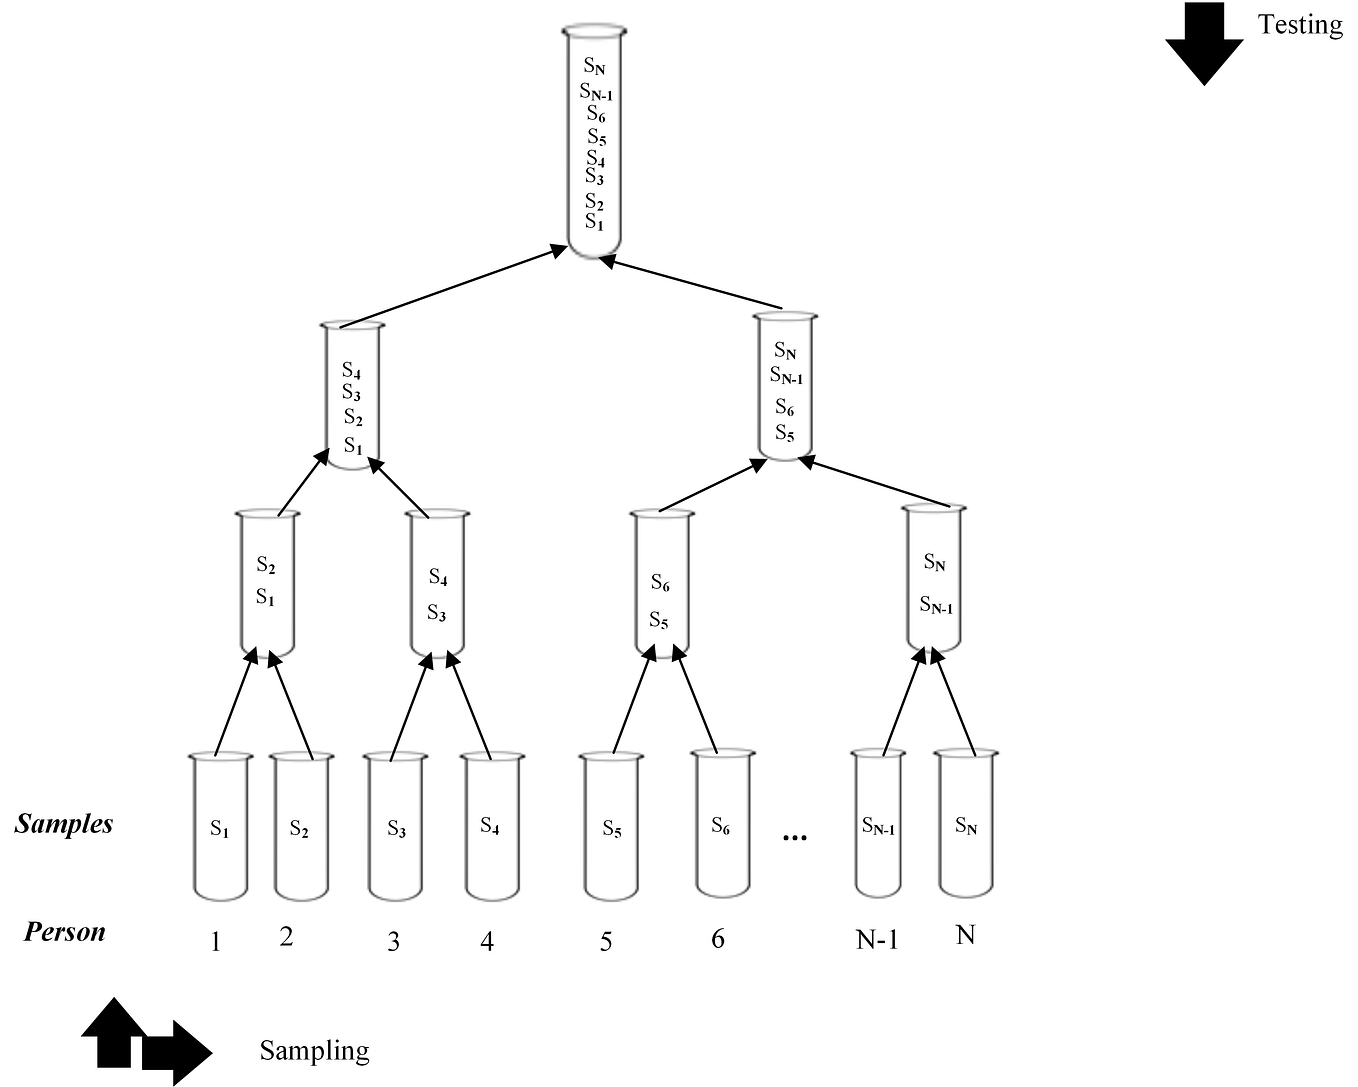 Merkle and Binary Tree Inspired Method for Accelerated COVID-19 Testing: A Concept